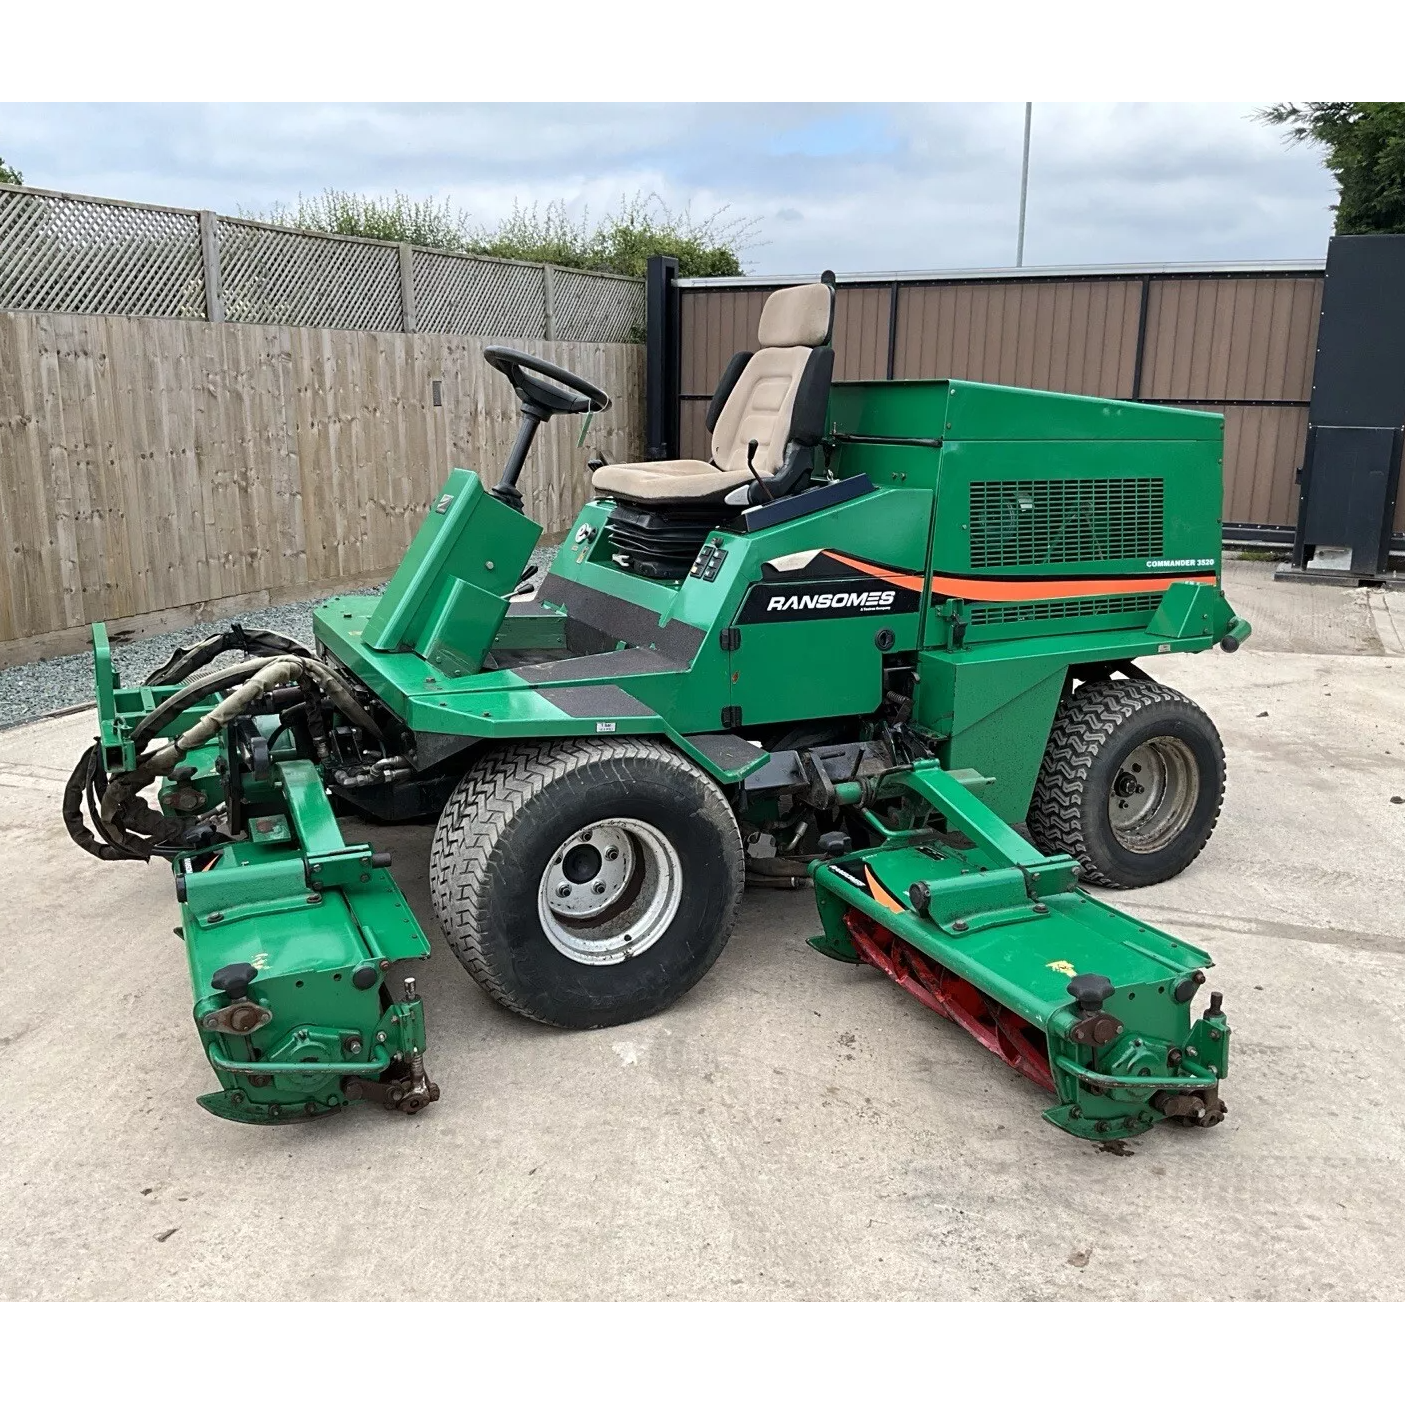 RANSOMES COMMANDER 3250 5 GANG CYLINDER RIDE ON LAWN MOWER